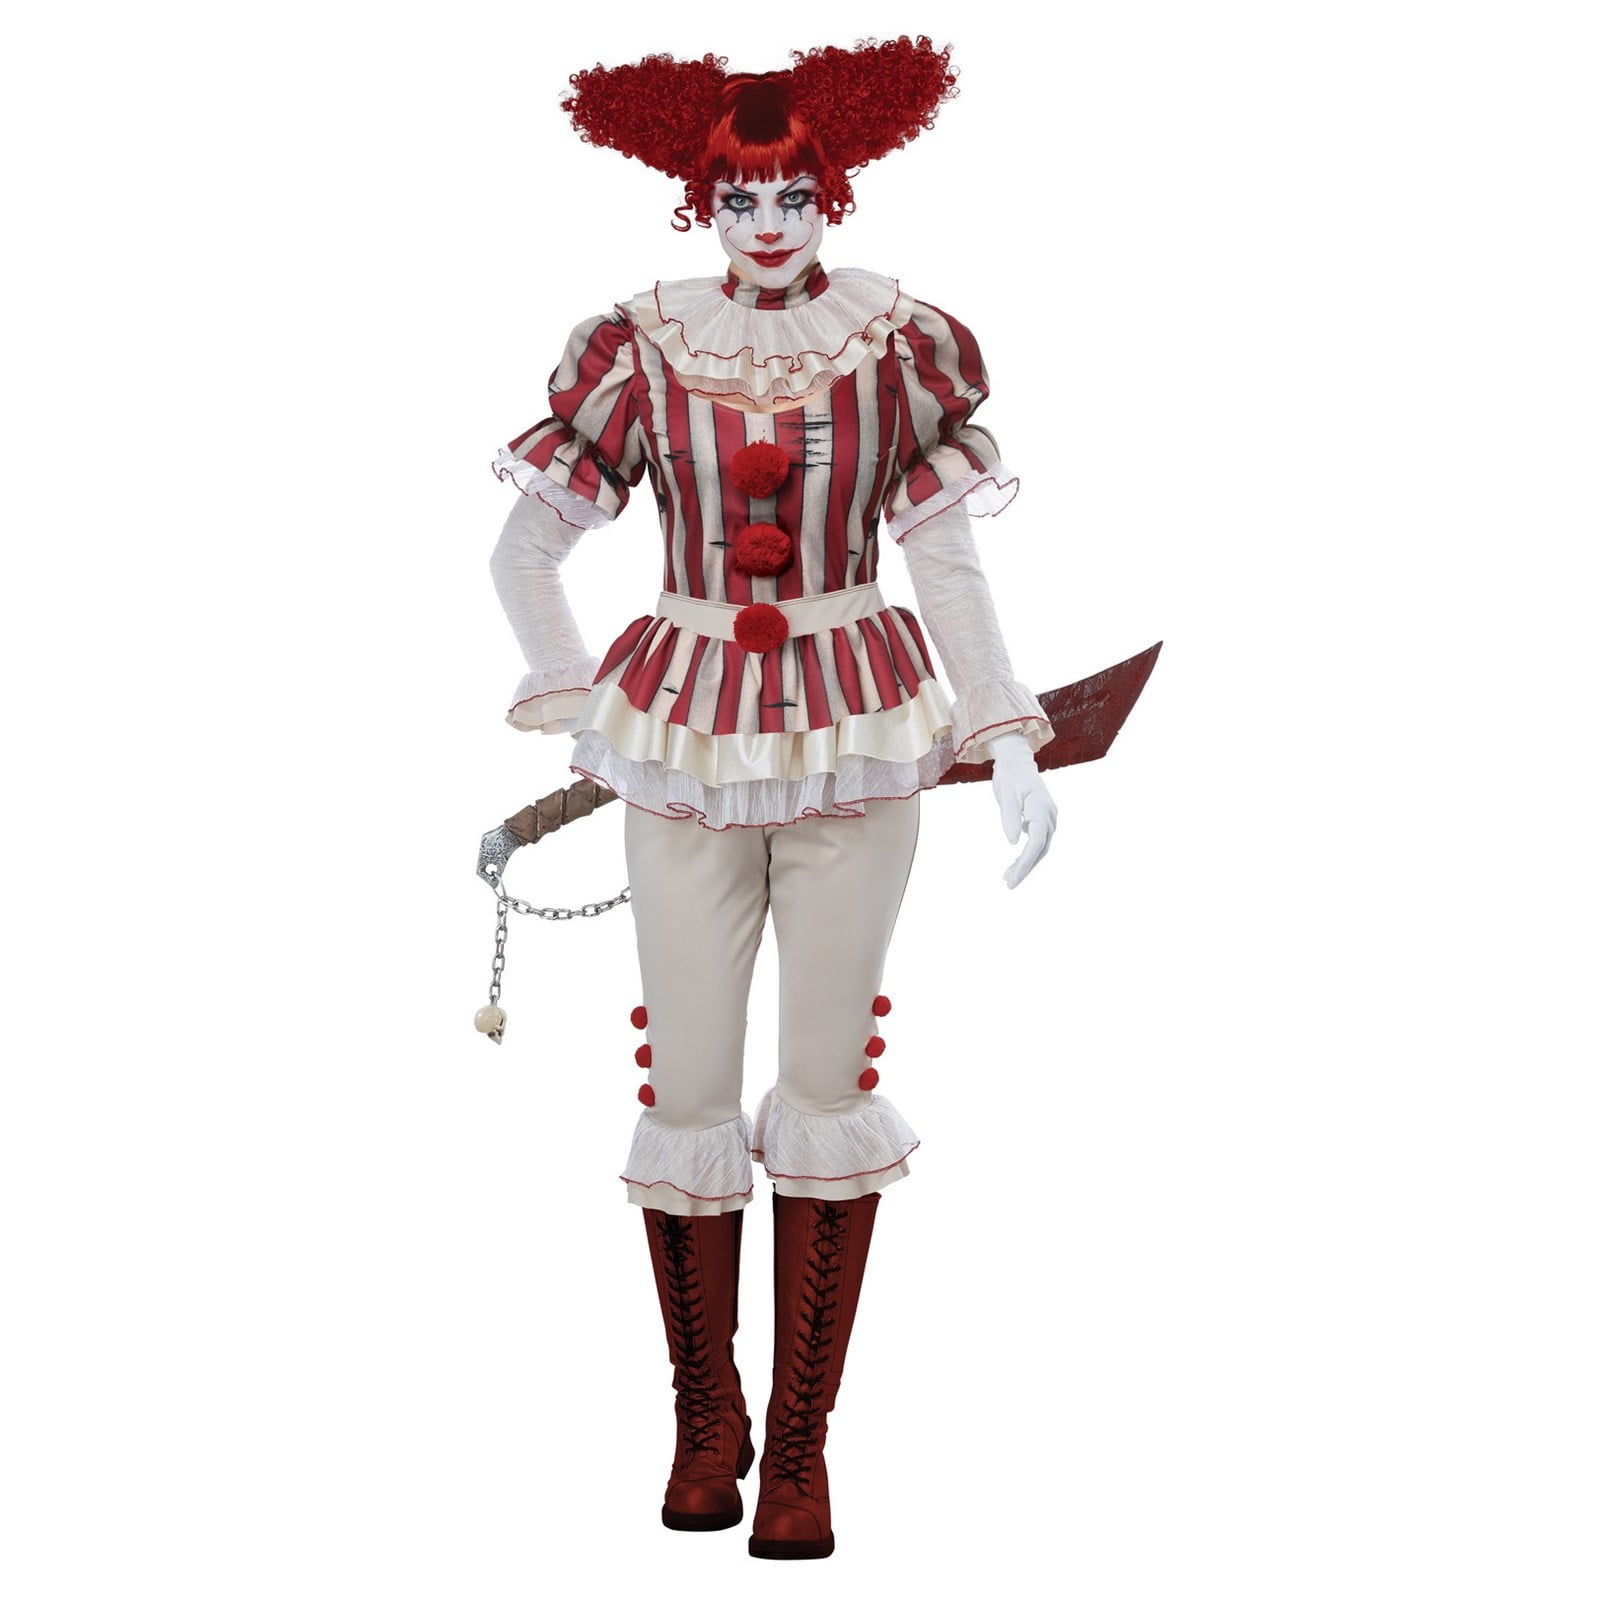 Adult Mens Circus Clown Costume Cosplay Halloween Fancy Dress Outfit 